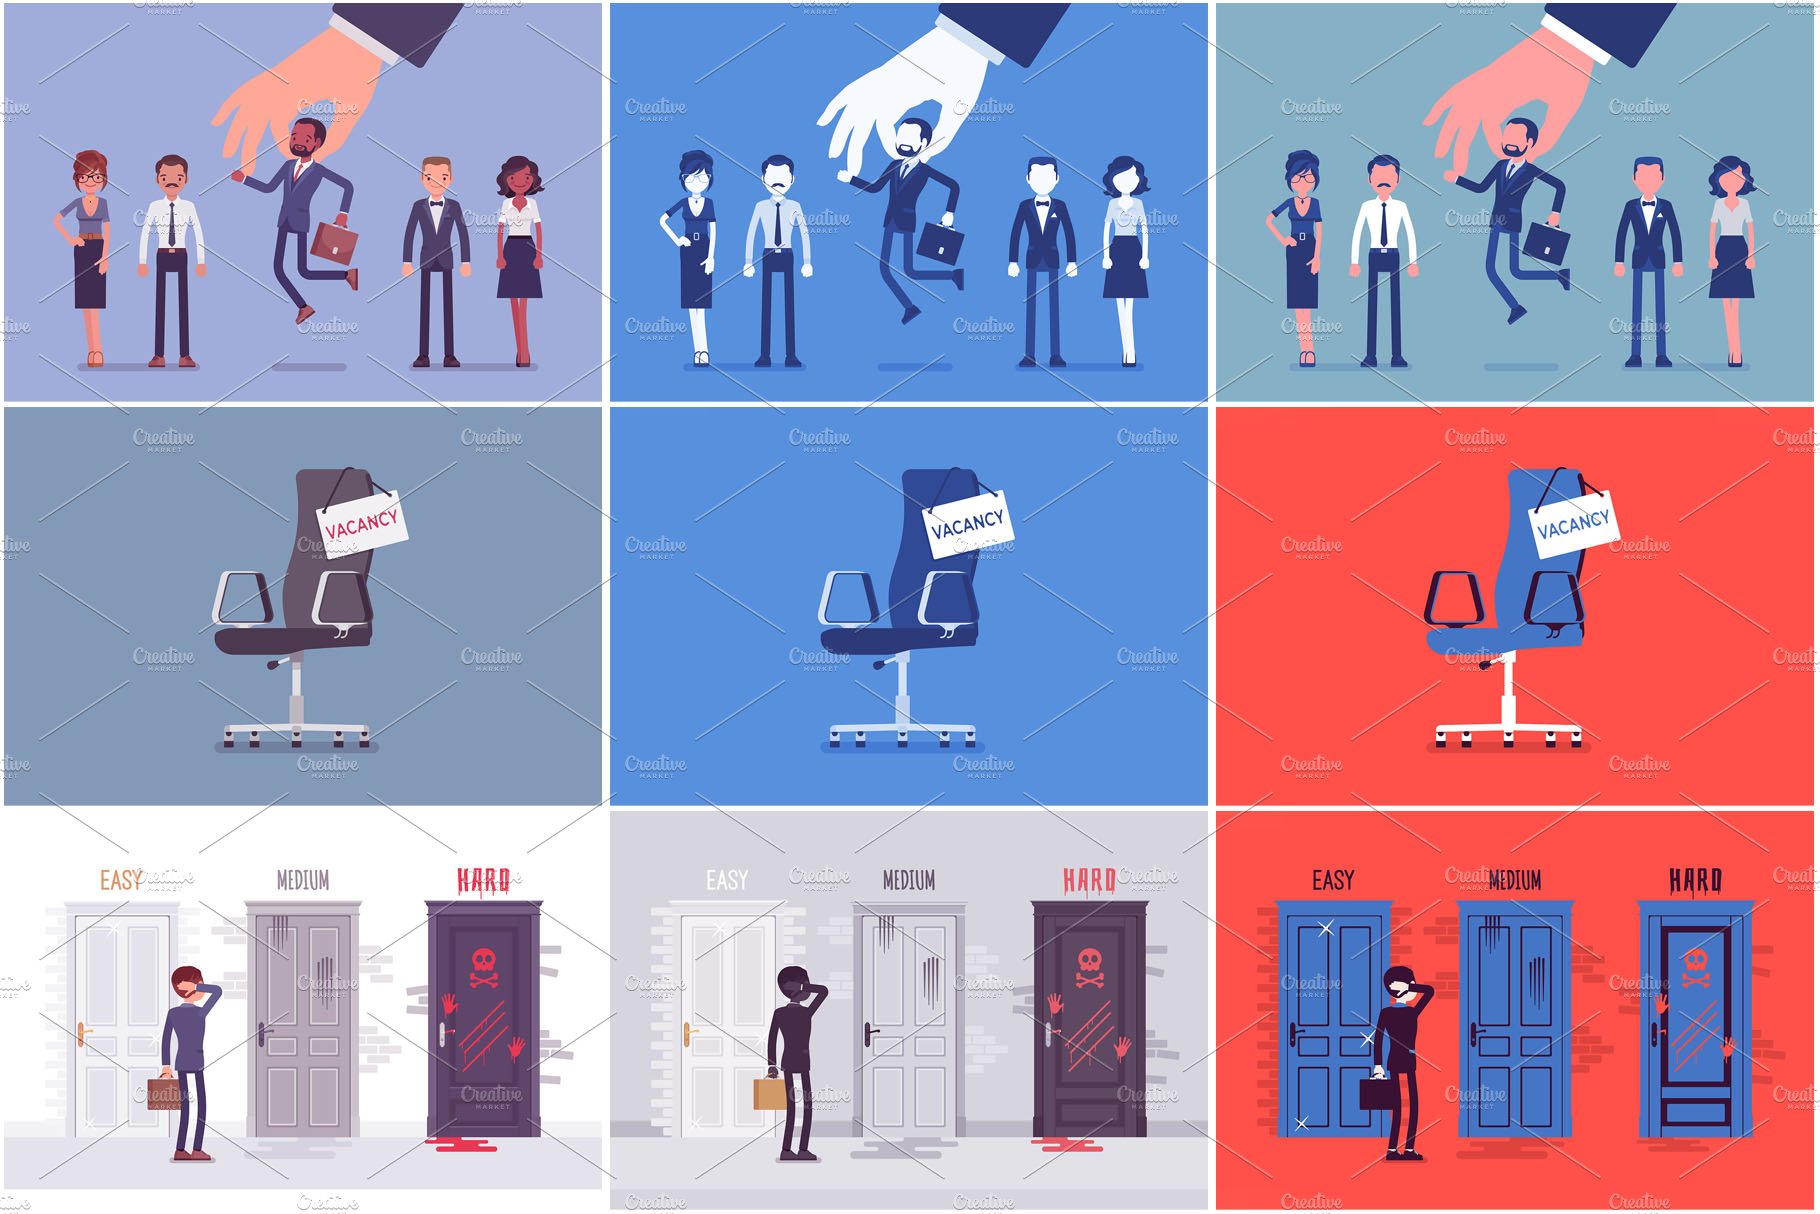 A series of illustrations of people holding signs.